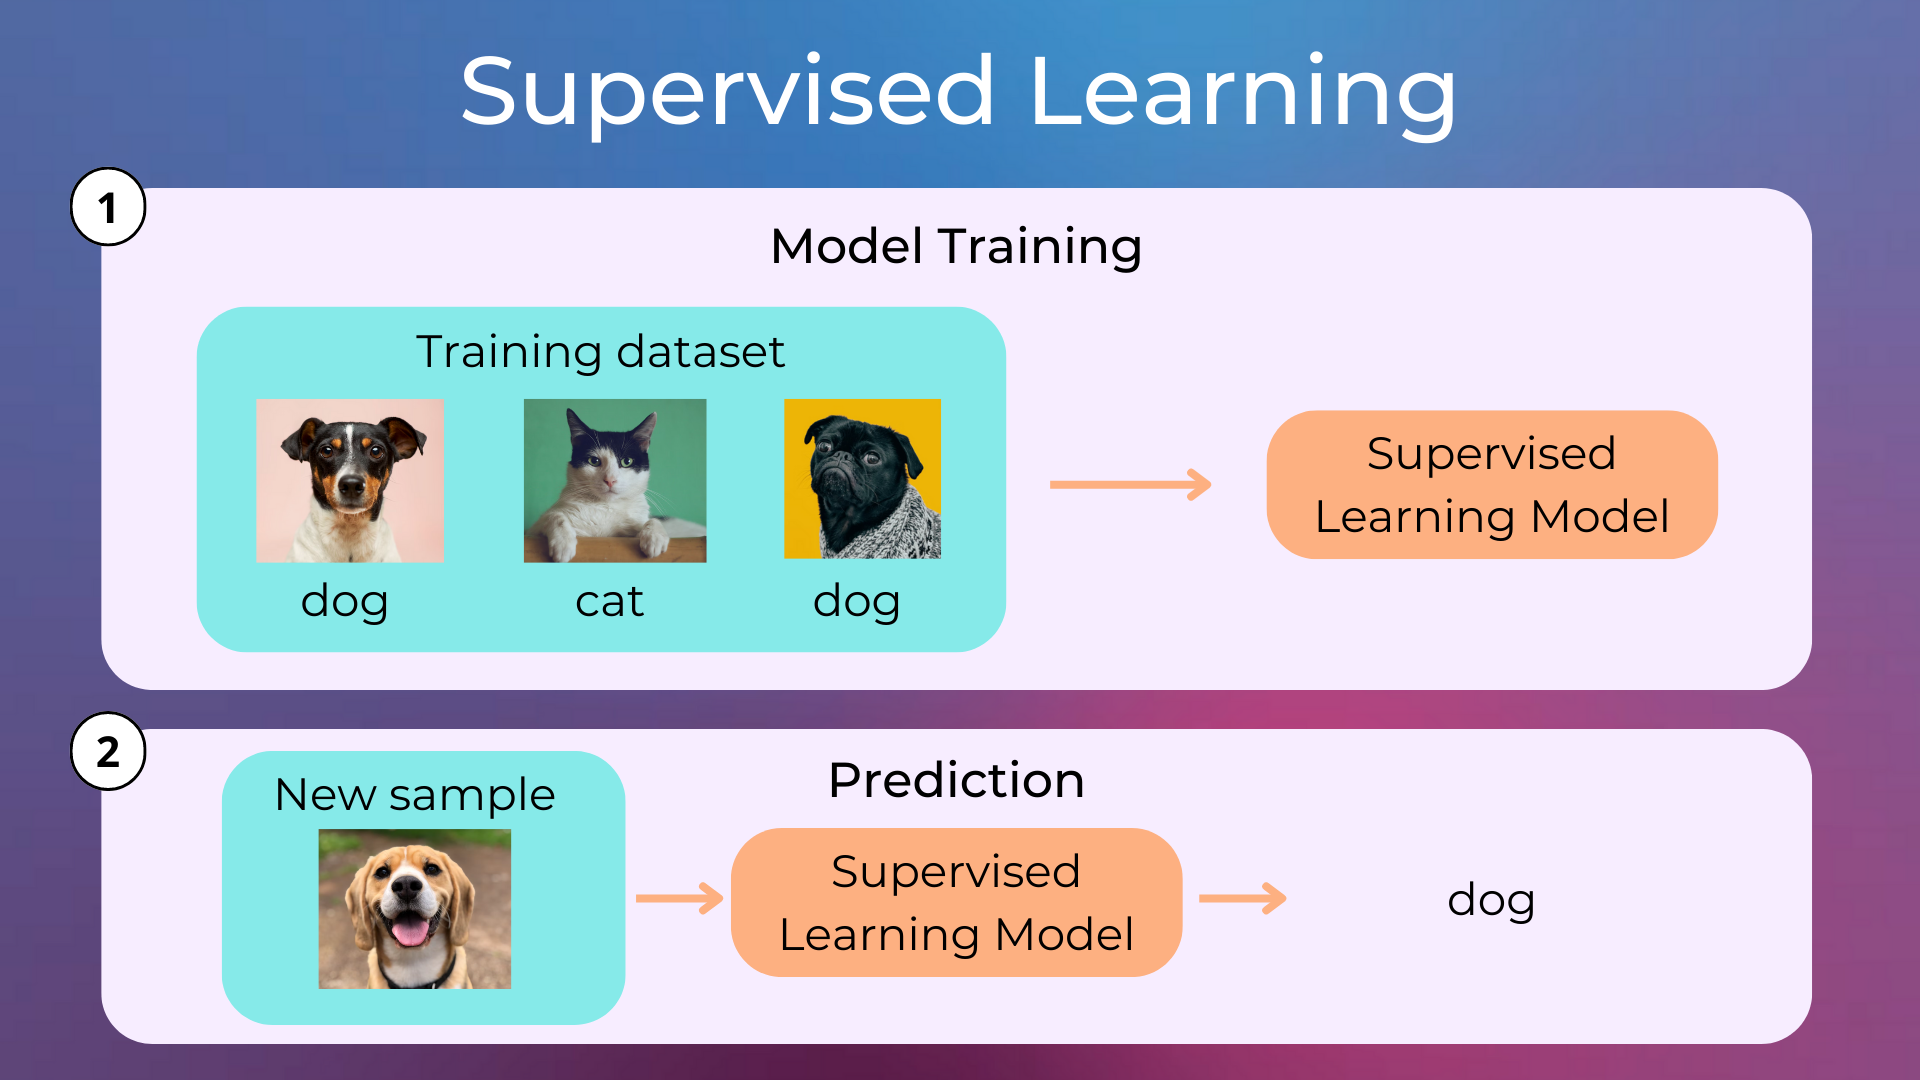 _images/supervised_learning.png